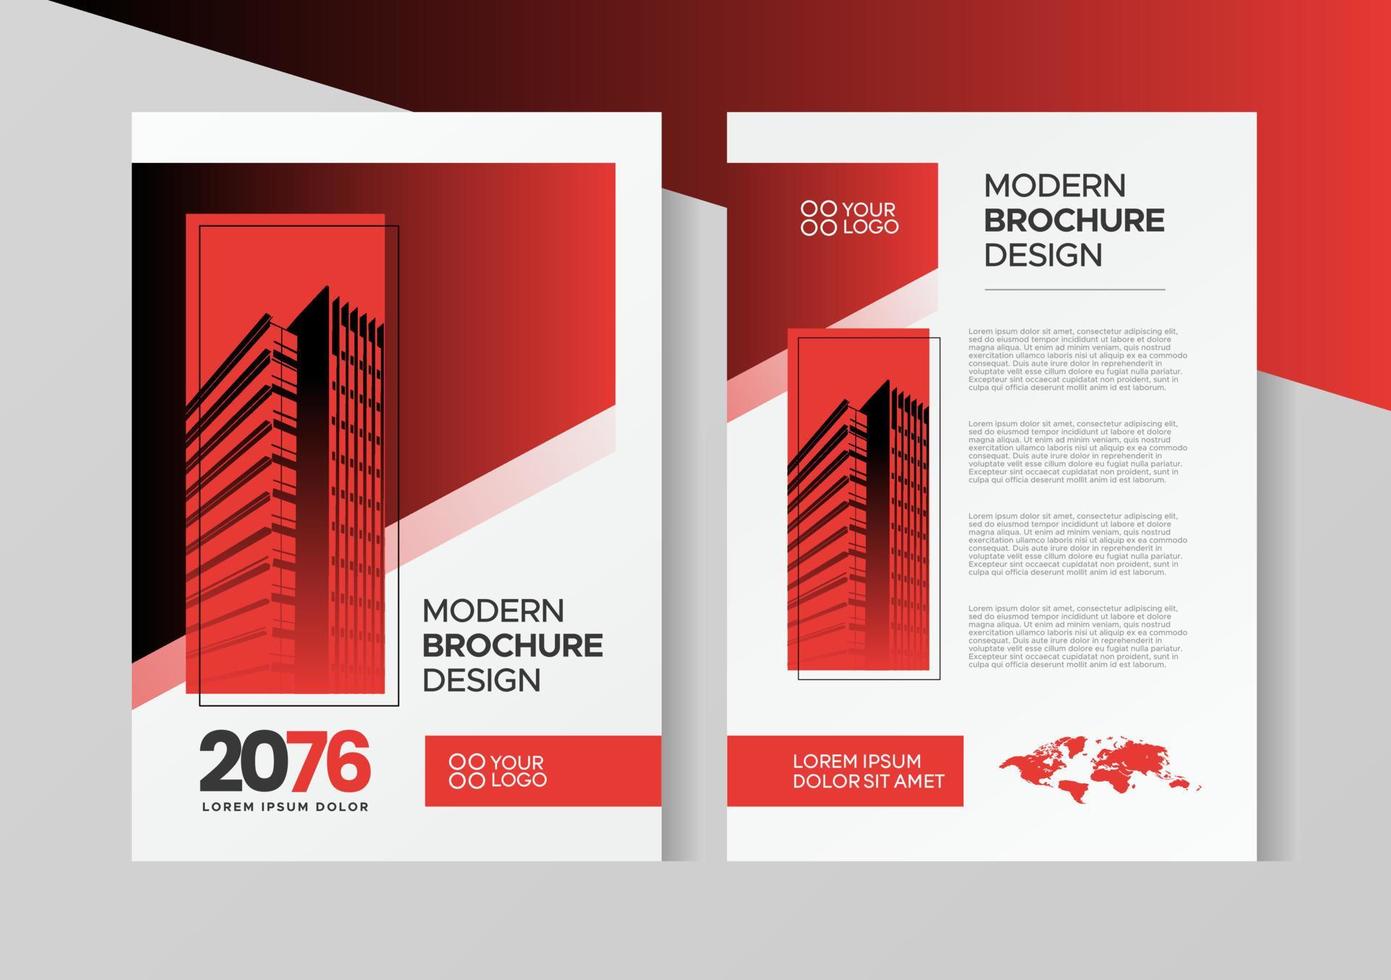 Flyer brochure design, business cover size A4 template, geometric rectangle red color vector